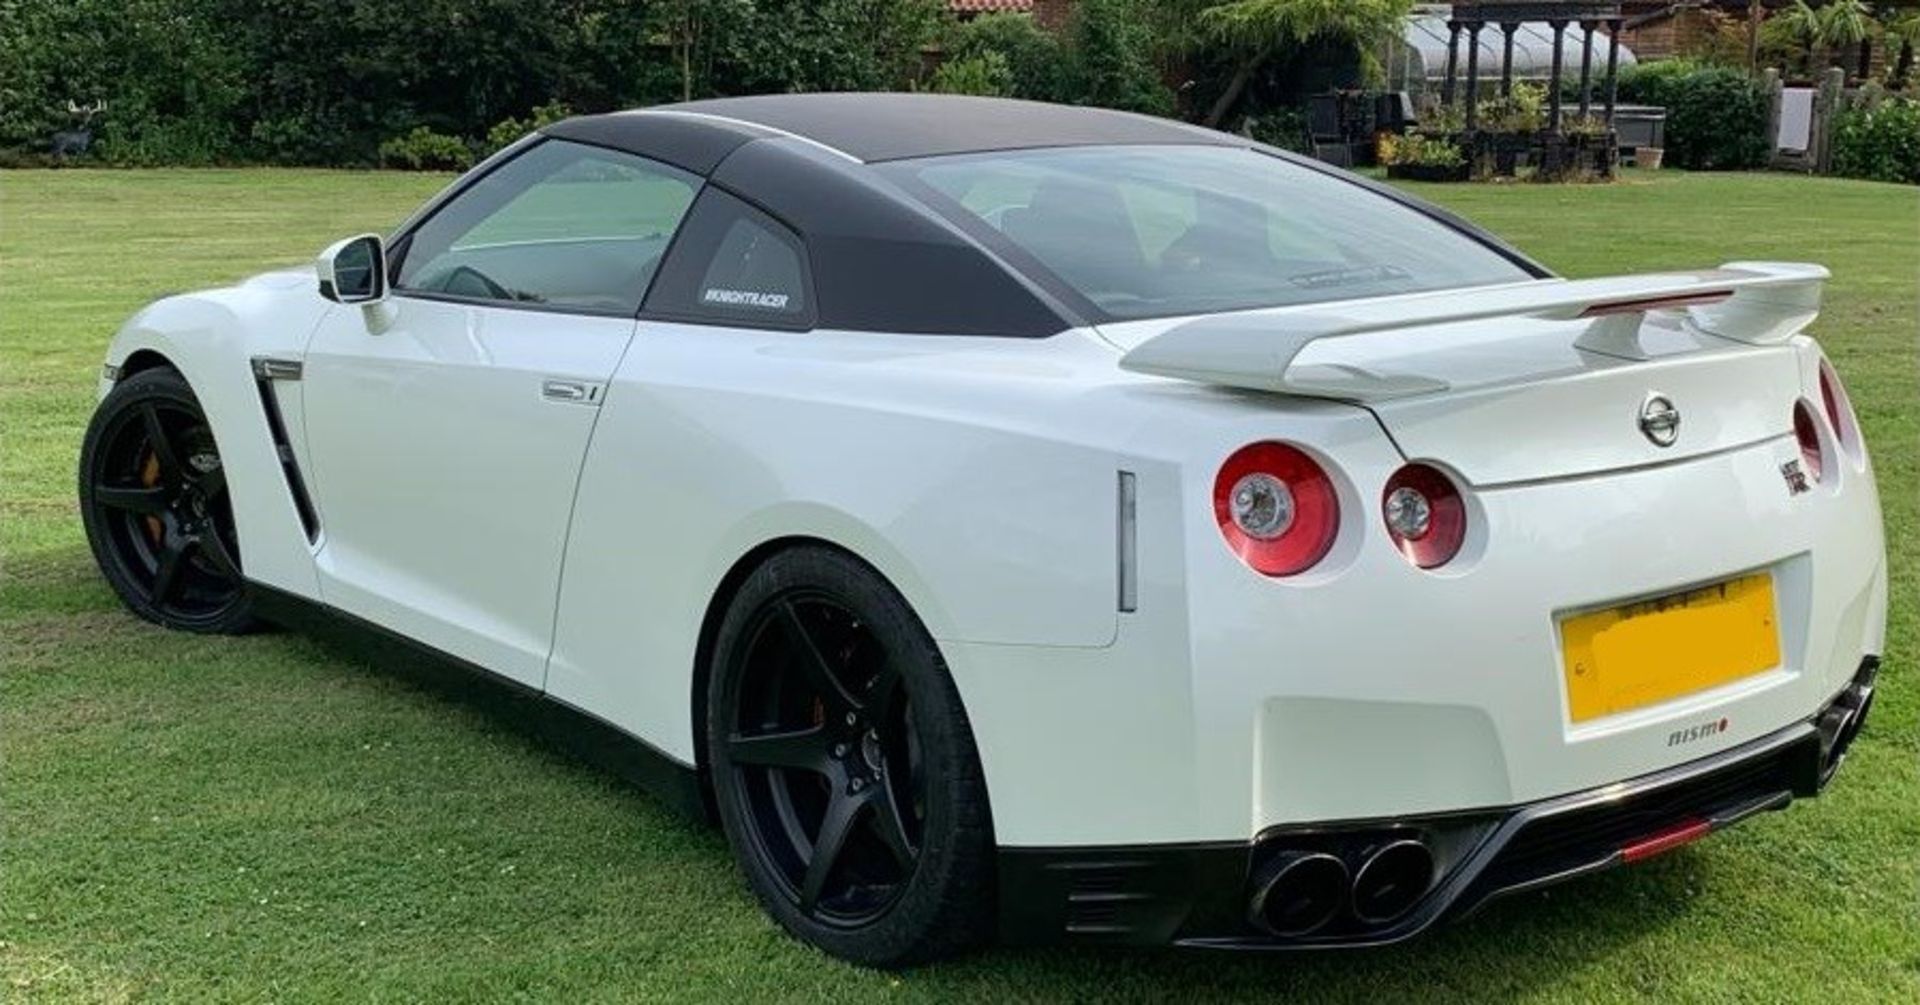 2011/11 REG NISSAN GT-R R35 PREMIUM EDITION S-A ONE FORMER KEEPER FROM NEW 22K MILES - WARRANTED! - Image 5 of 22